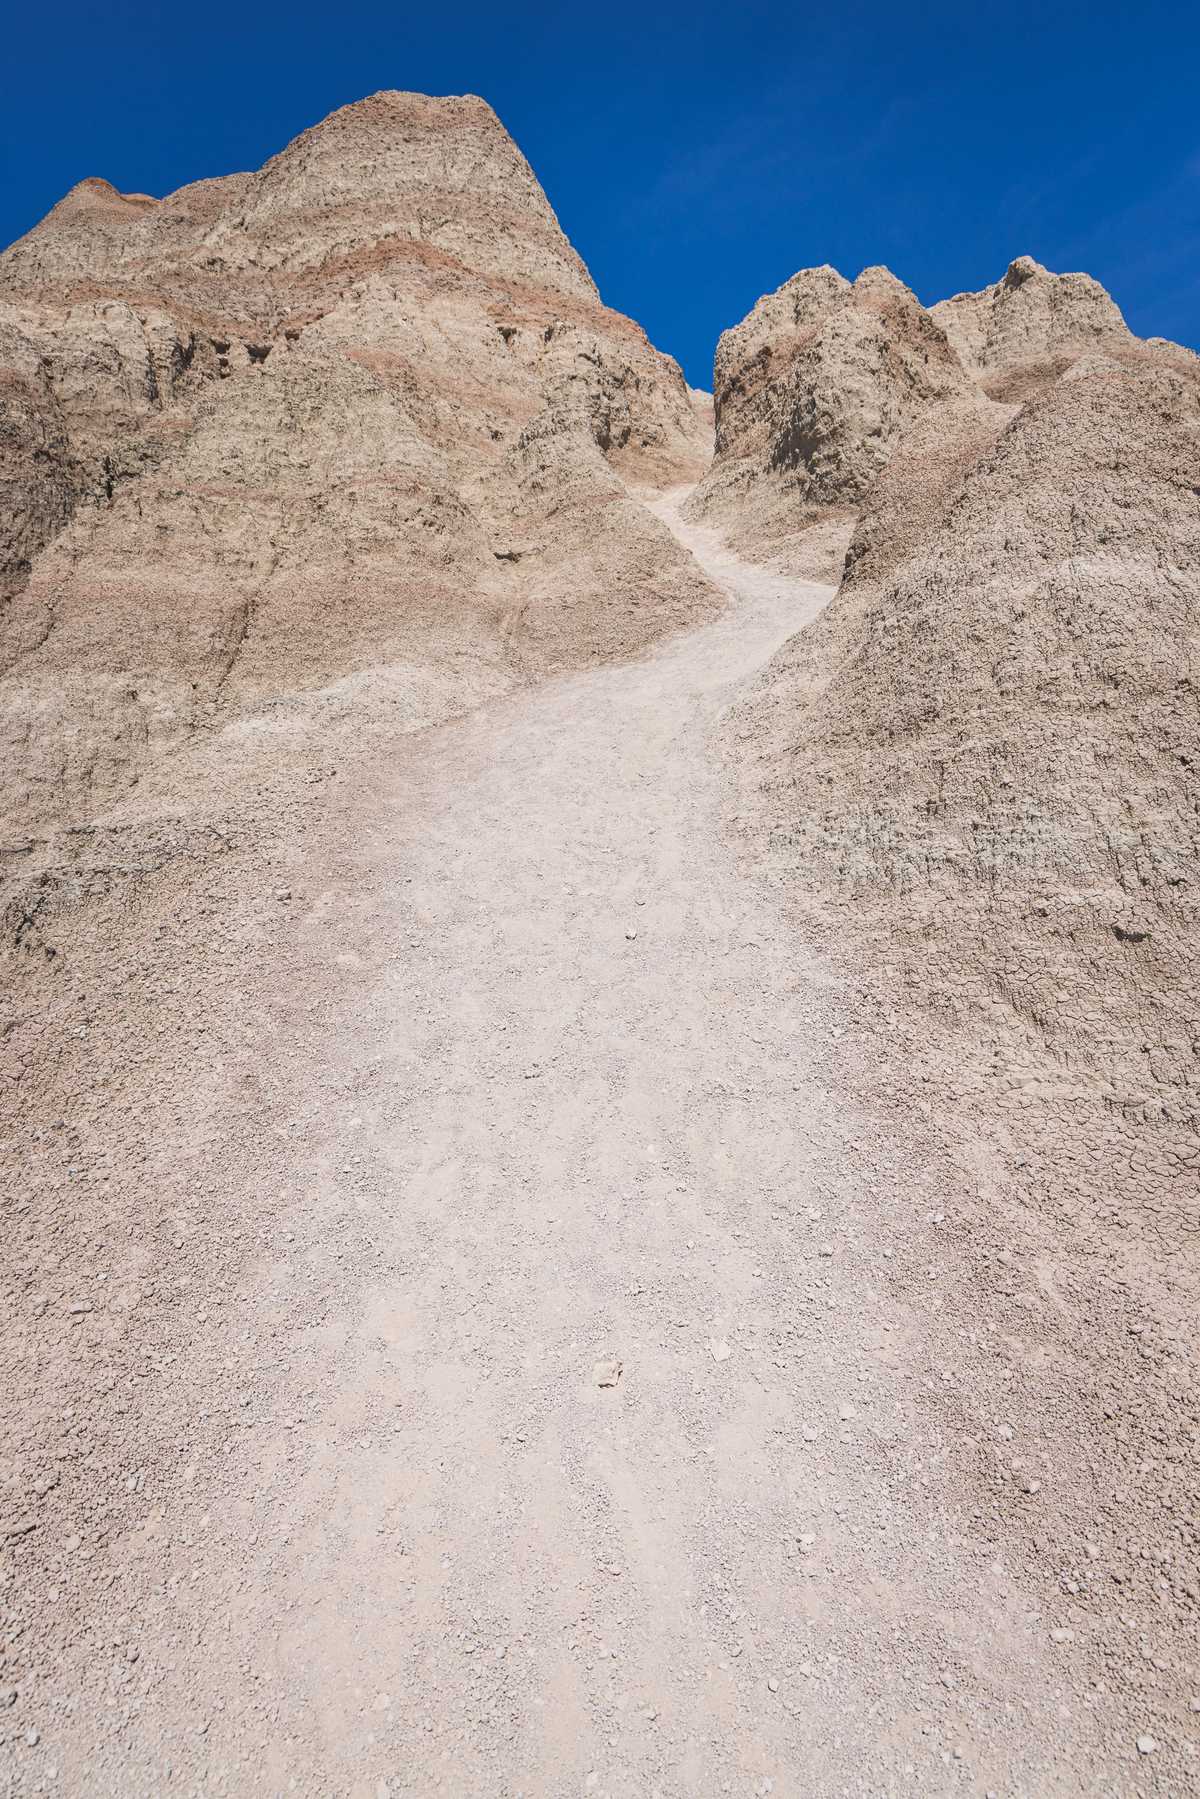 A smooth, worn path winds up a steep hill in between rough rock formations under a bright blue sky